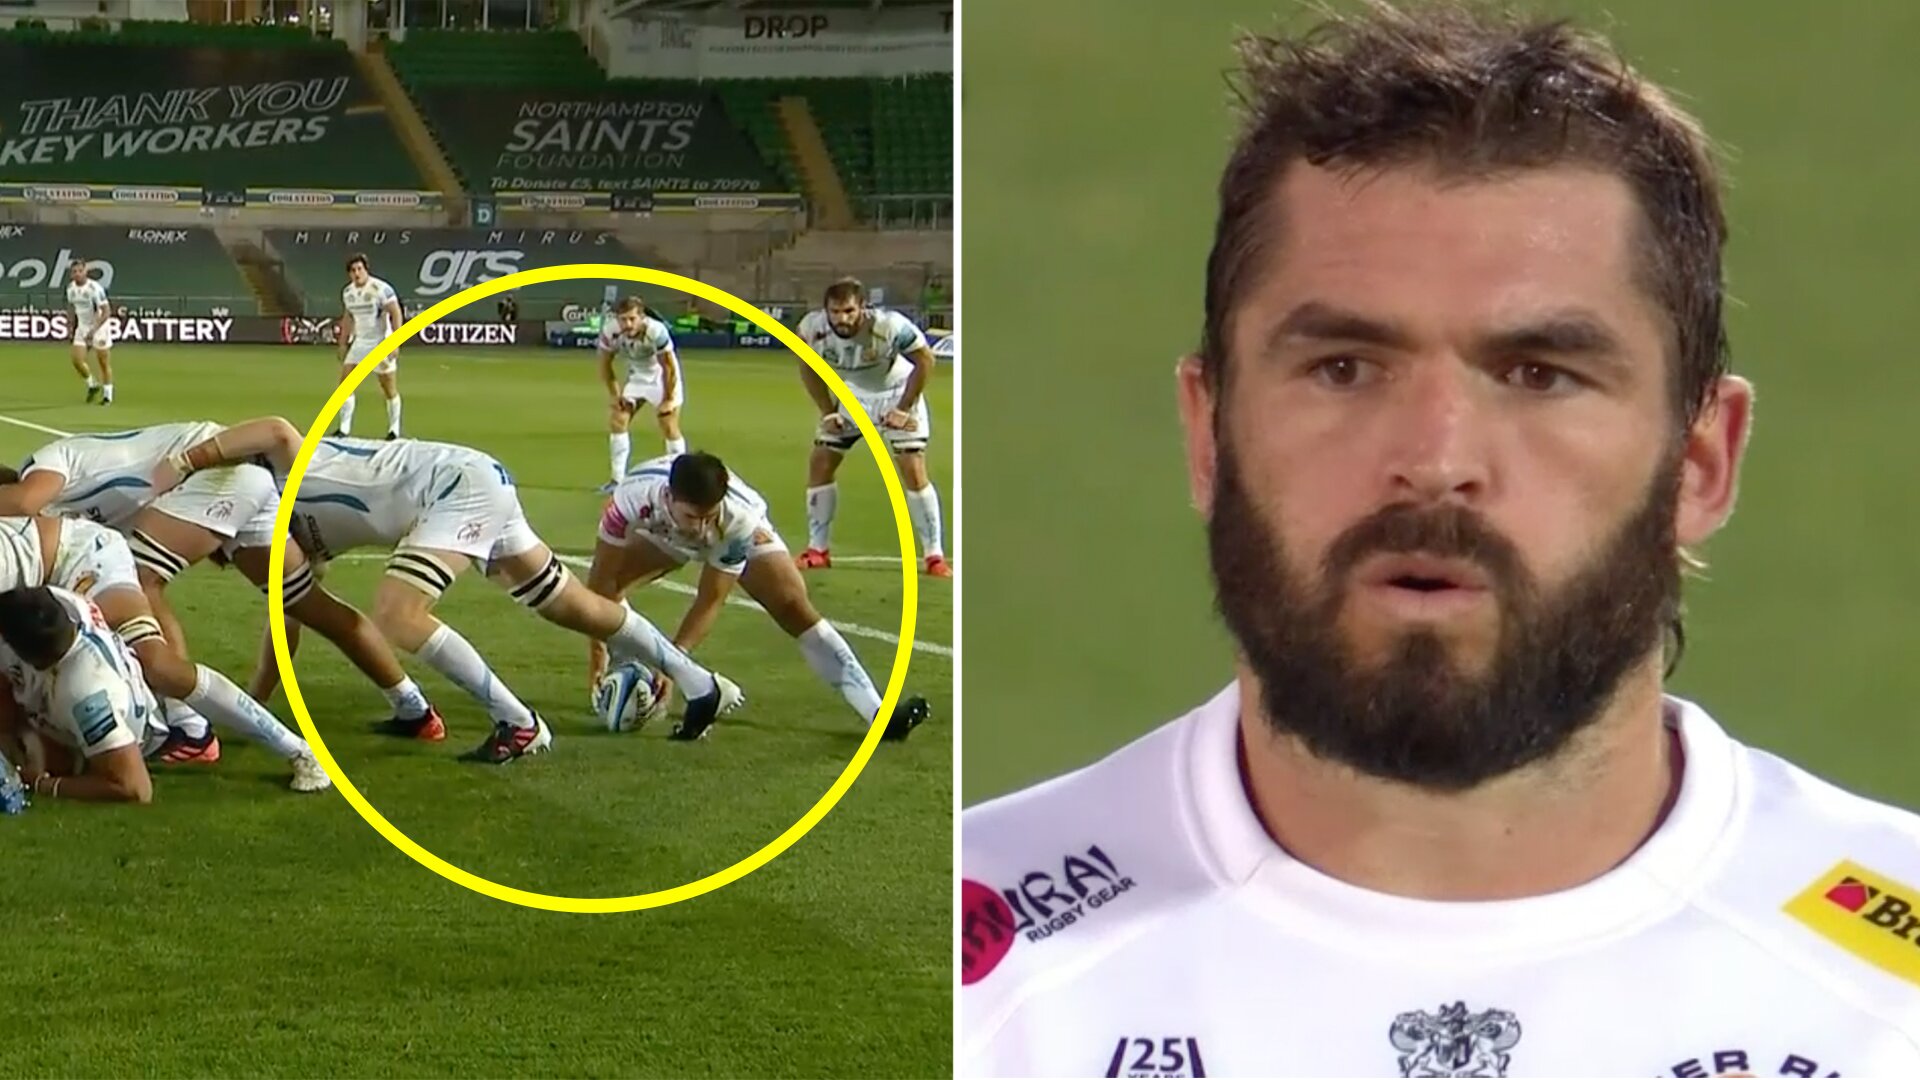 A rugby genius has perfectly explained why Exeter Chiefs are so dominant in rugby